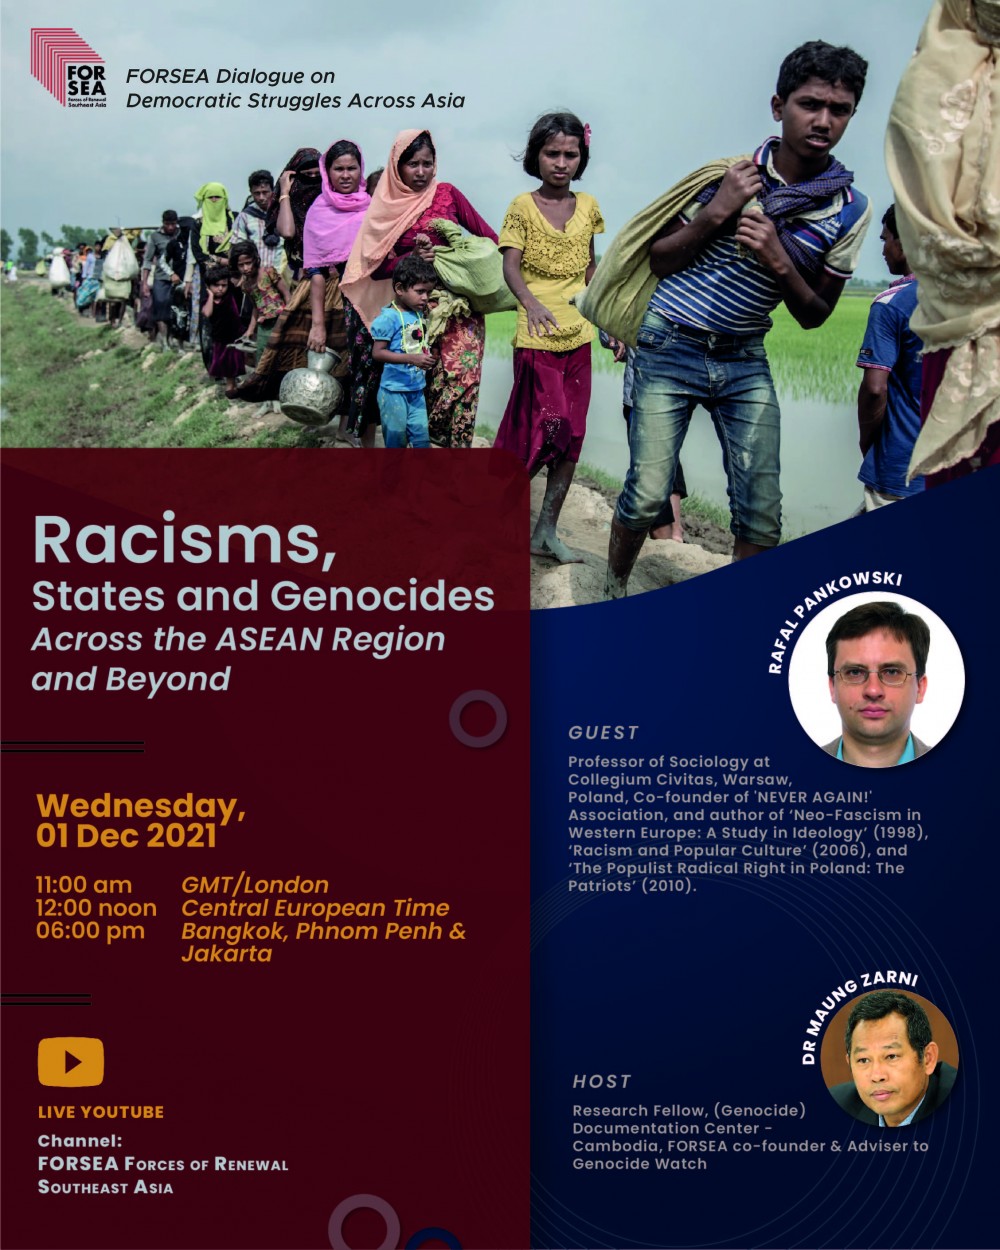 RACISMS, STATES AND GENOCIDES ACROSS THE ASEAN REGION AND BEYOND